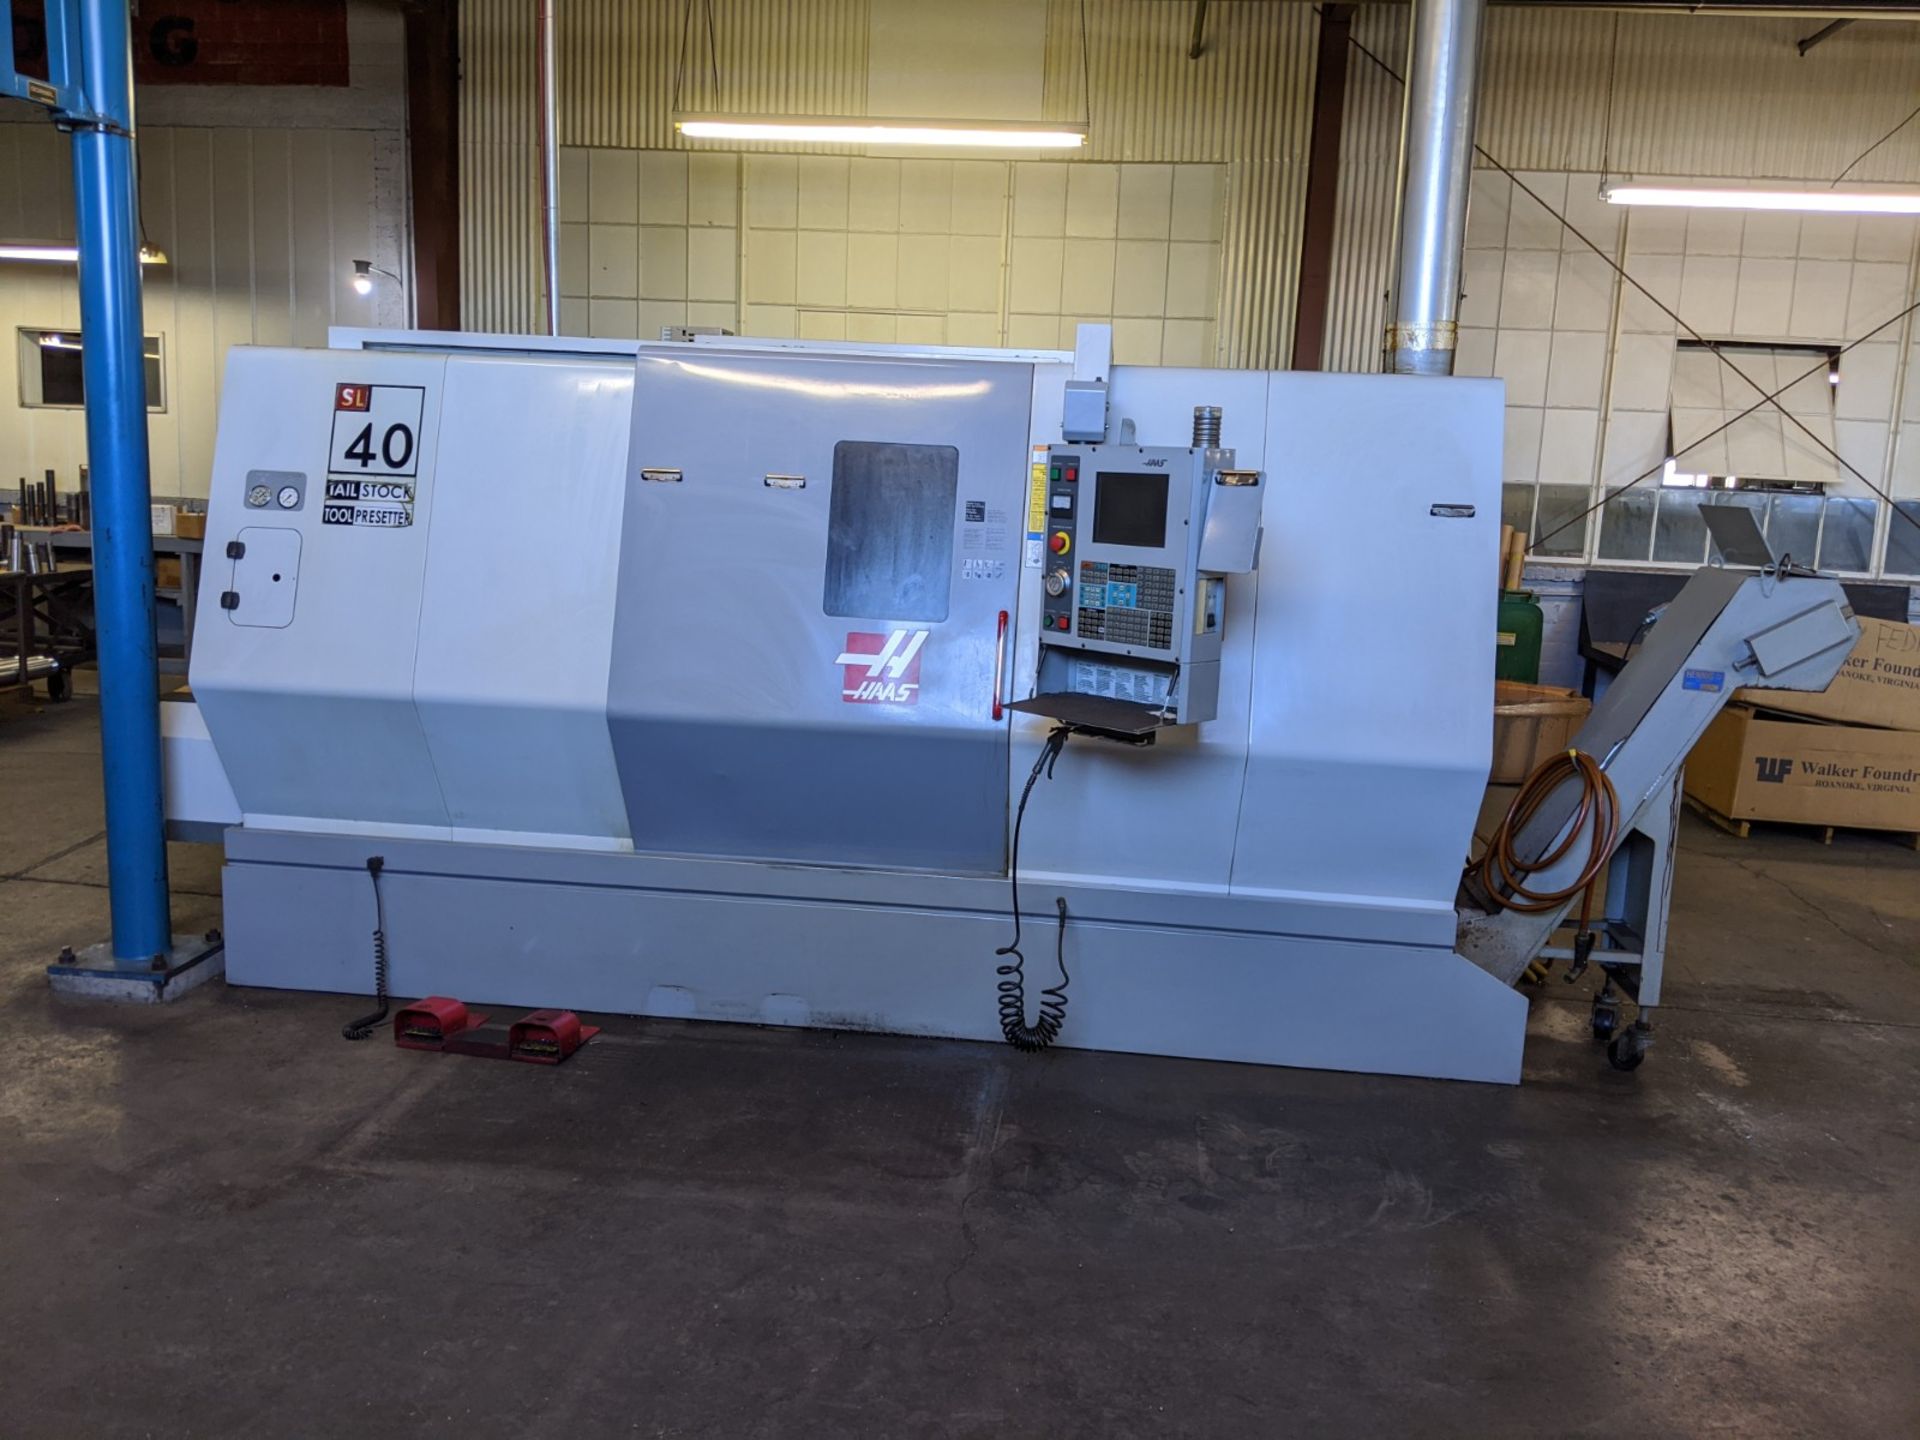 HAAS MODEL SL-40T CNC TURNING CENTER; S/N 69082, 18" 3-JAW CHUCK, 10 POSITION TURRET, TAILSTOCK, - Image 2 of 14